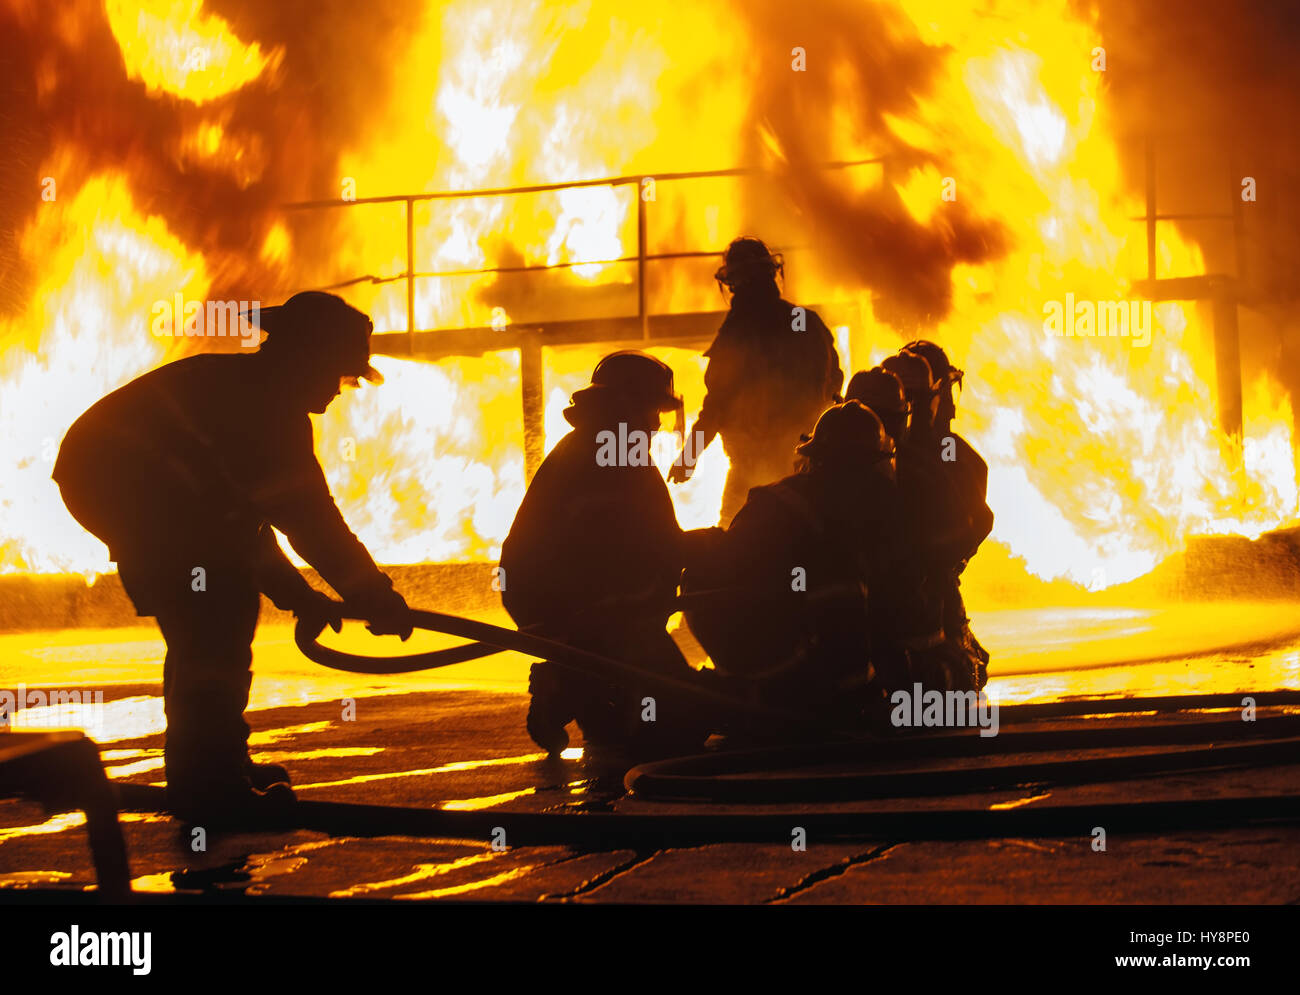 Firefighter adjusting firehose during firefighting exercise Stock Photo